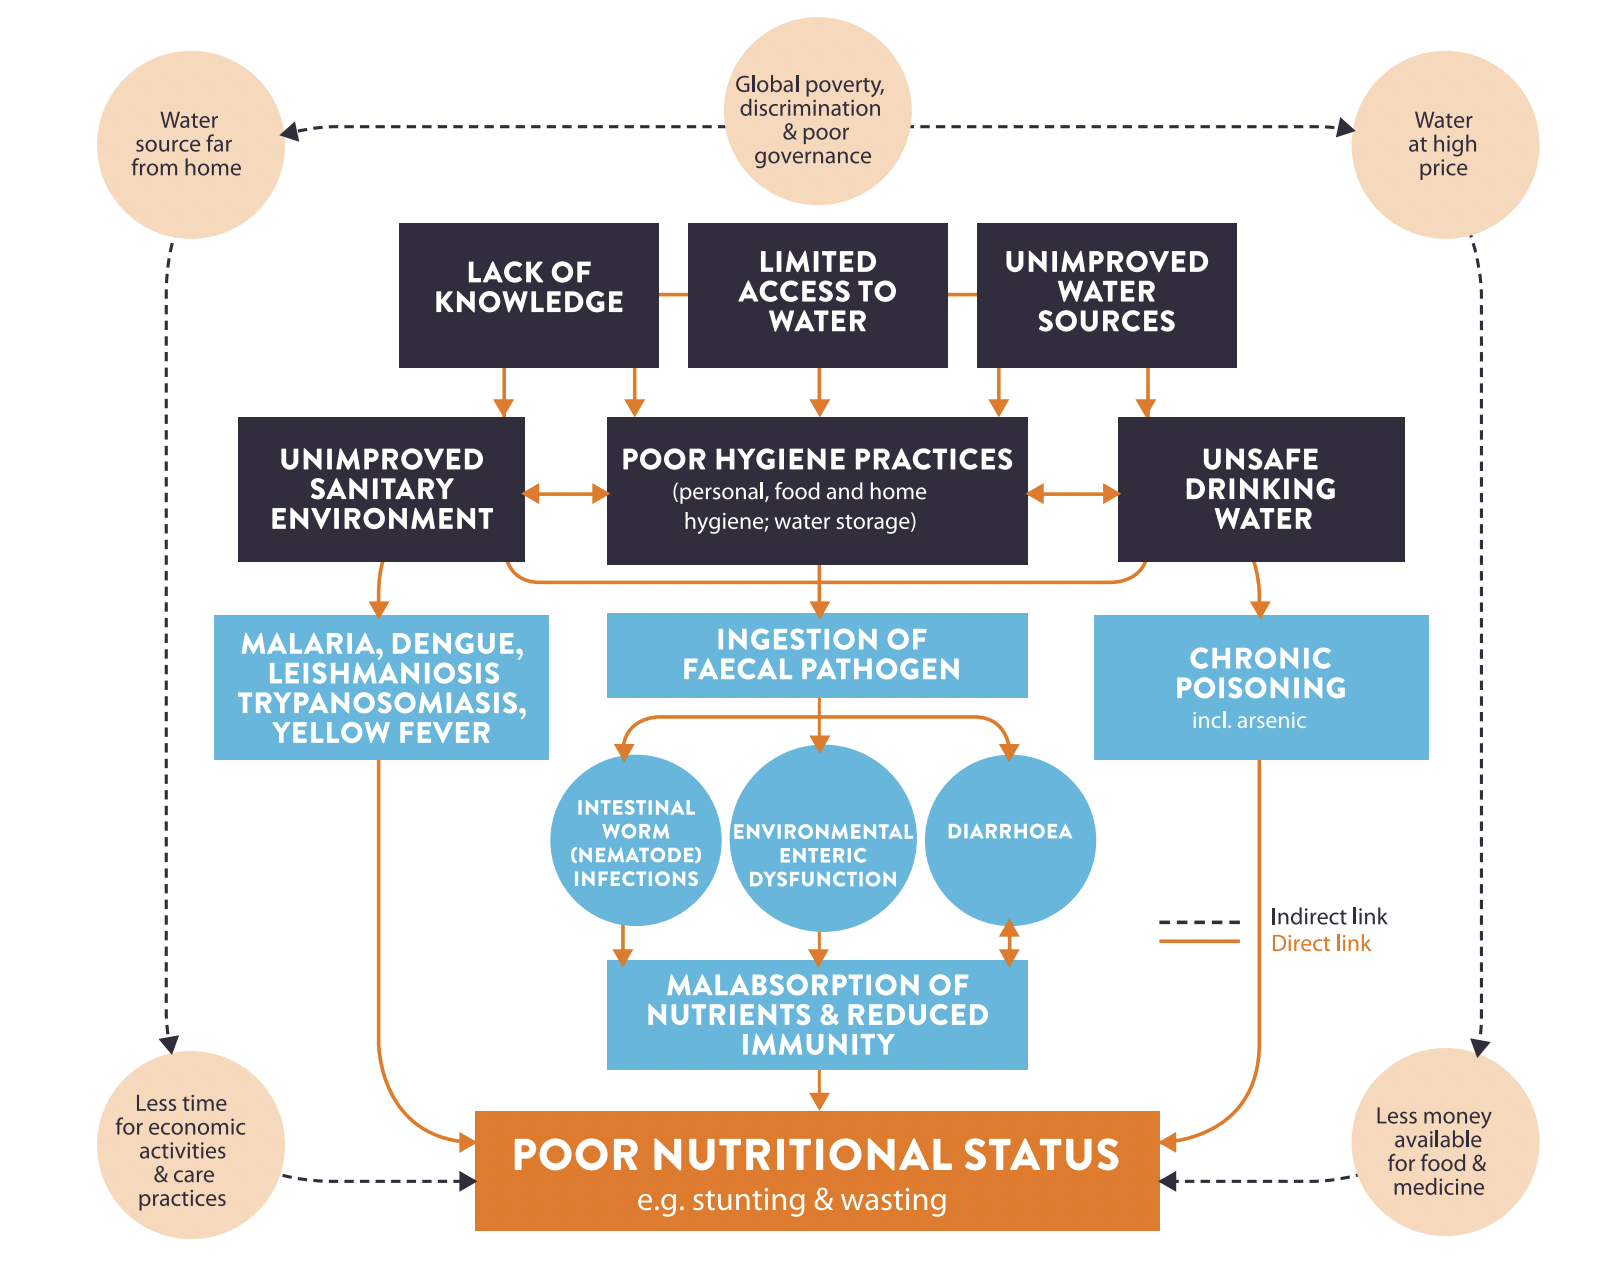 ©Dangour at.al (2013), adapted by Lapegue J., ACF (2014) “WASH and nutrition factsheet”